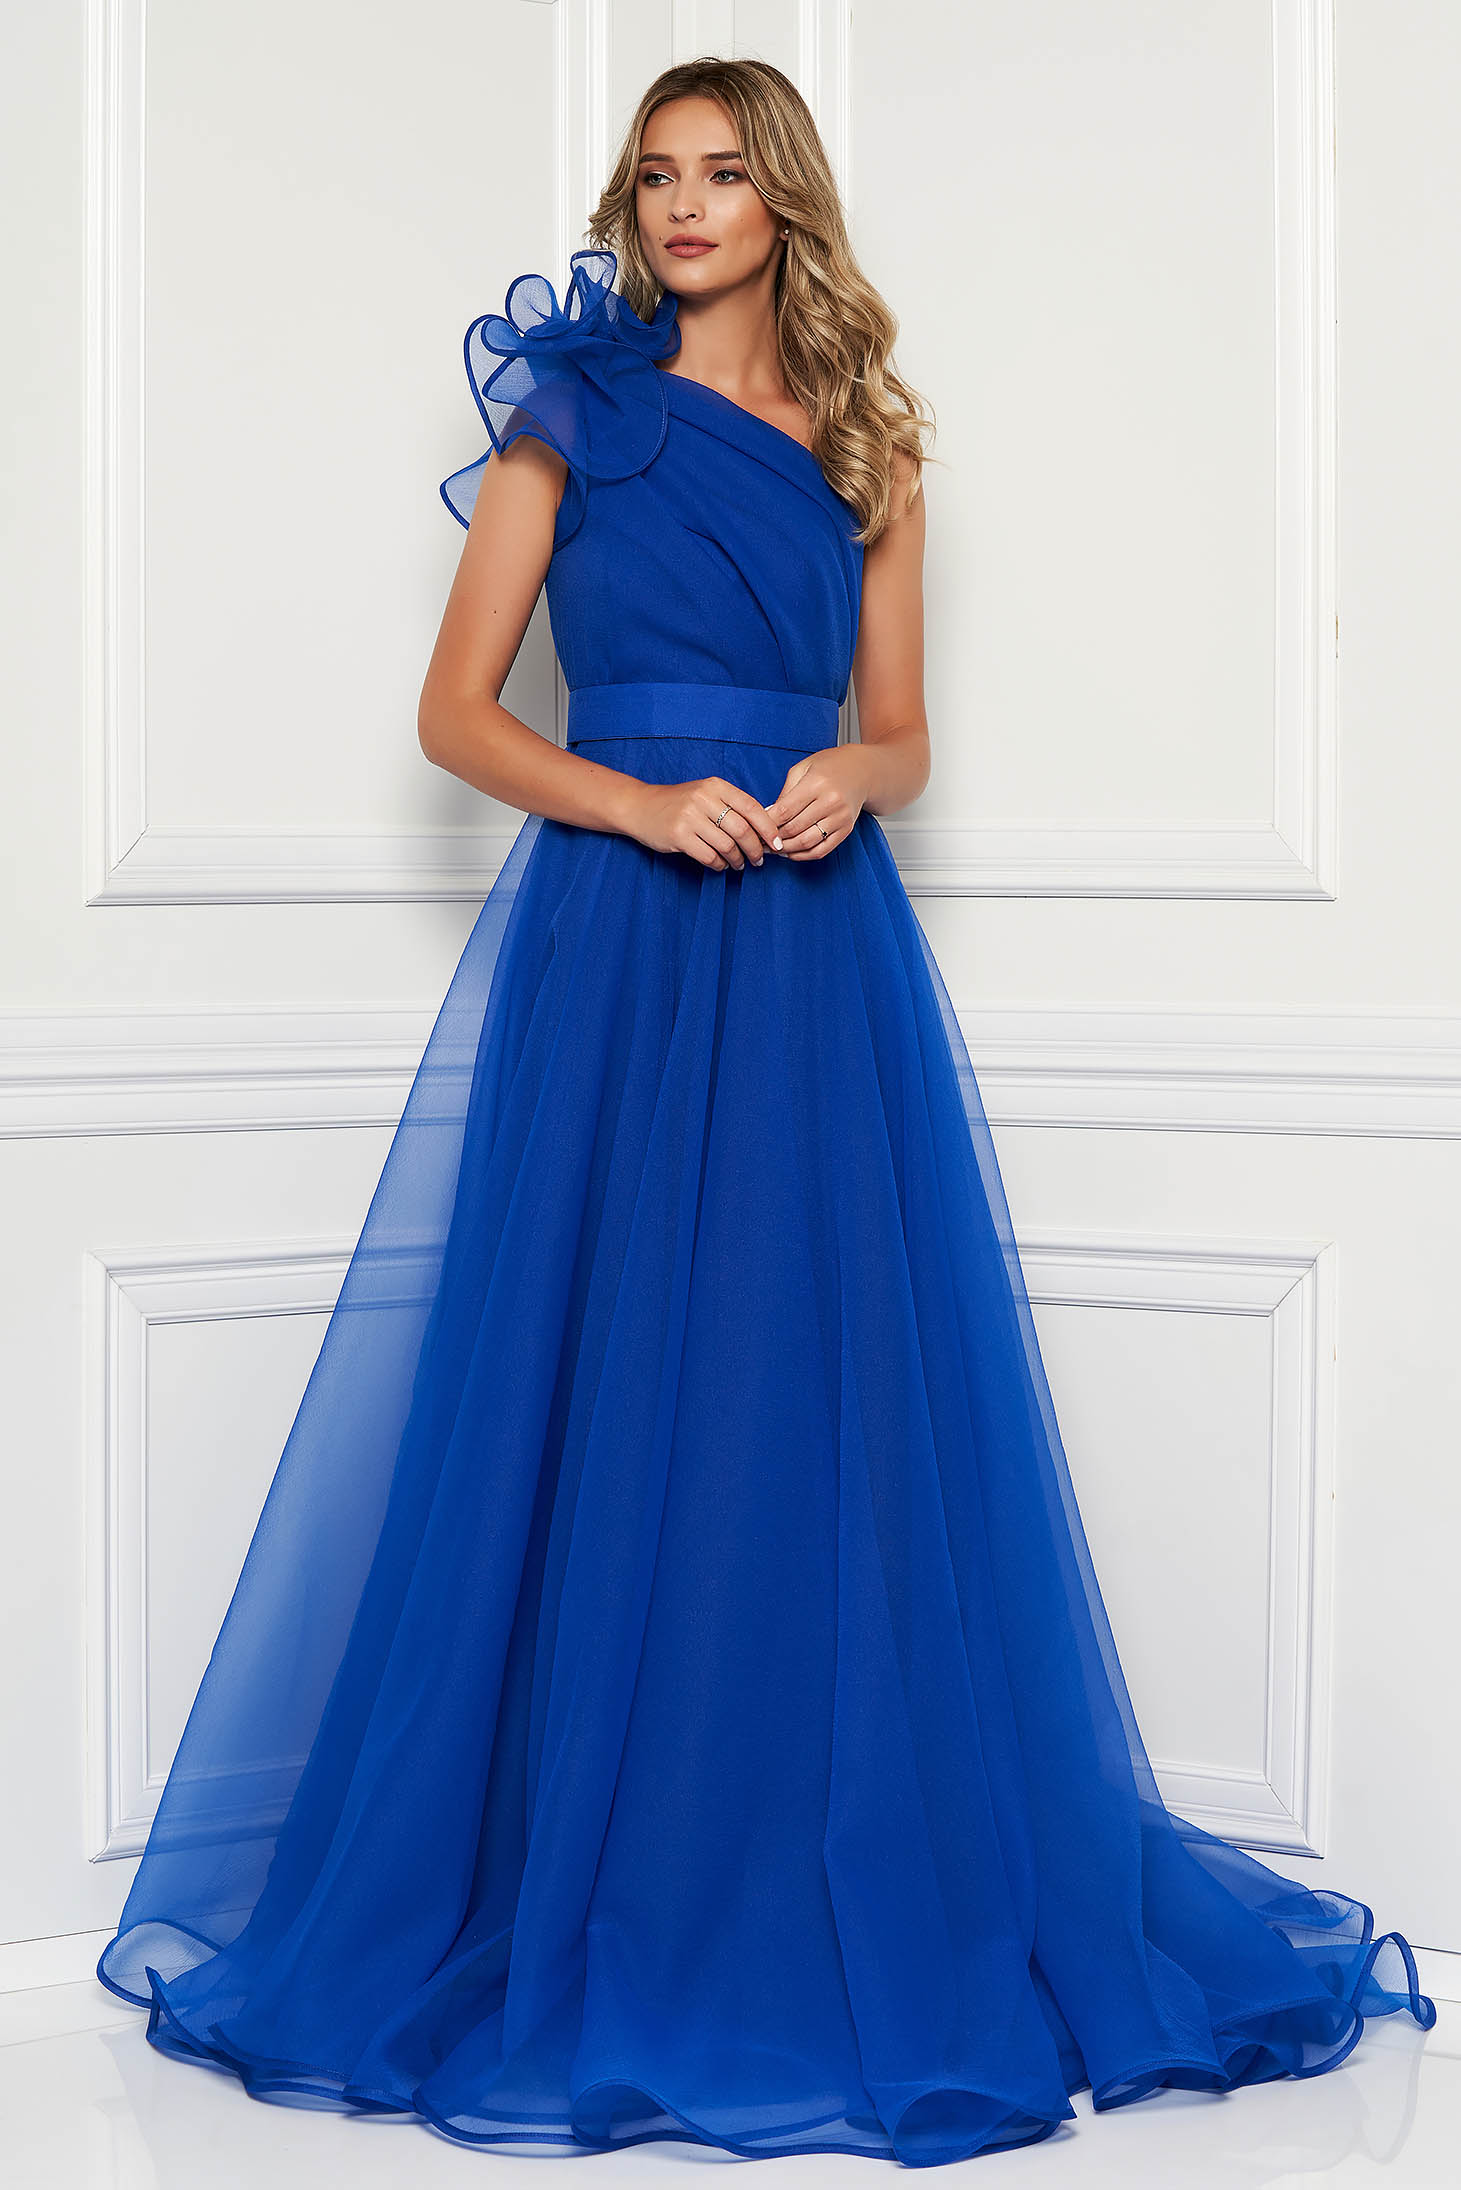 Blue tulle dress with a-line cut on the shoulder accessorized with a belt - Ana Radu